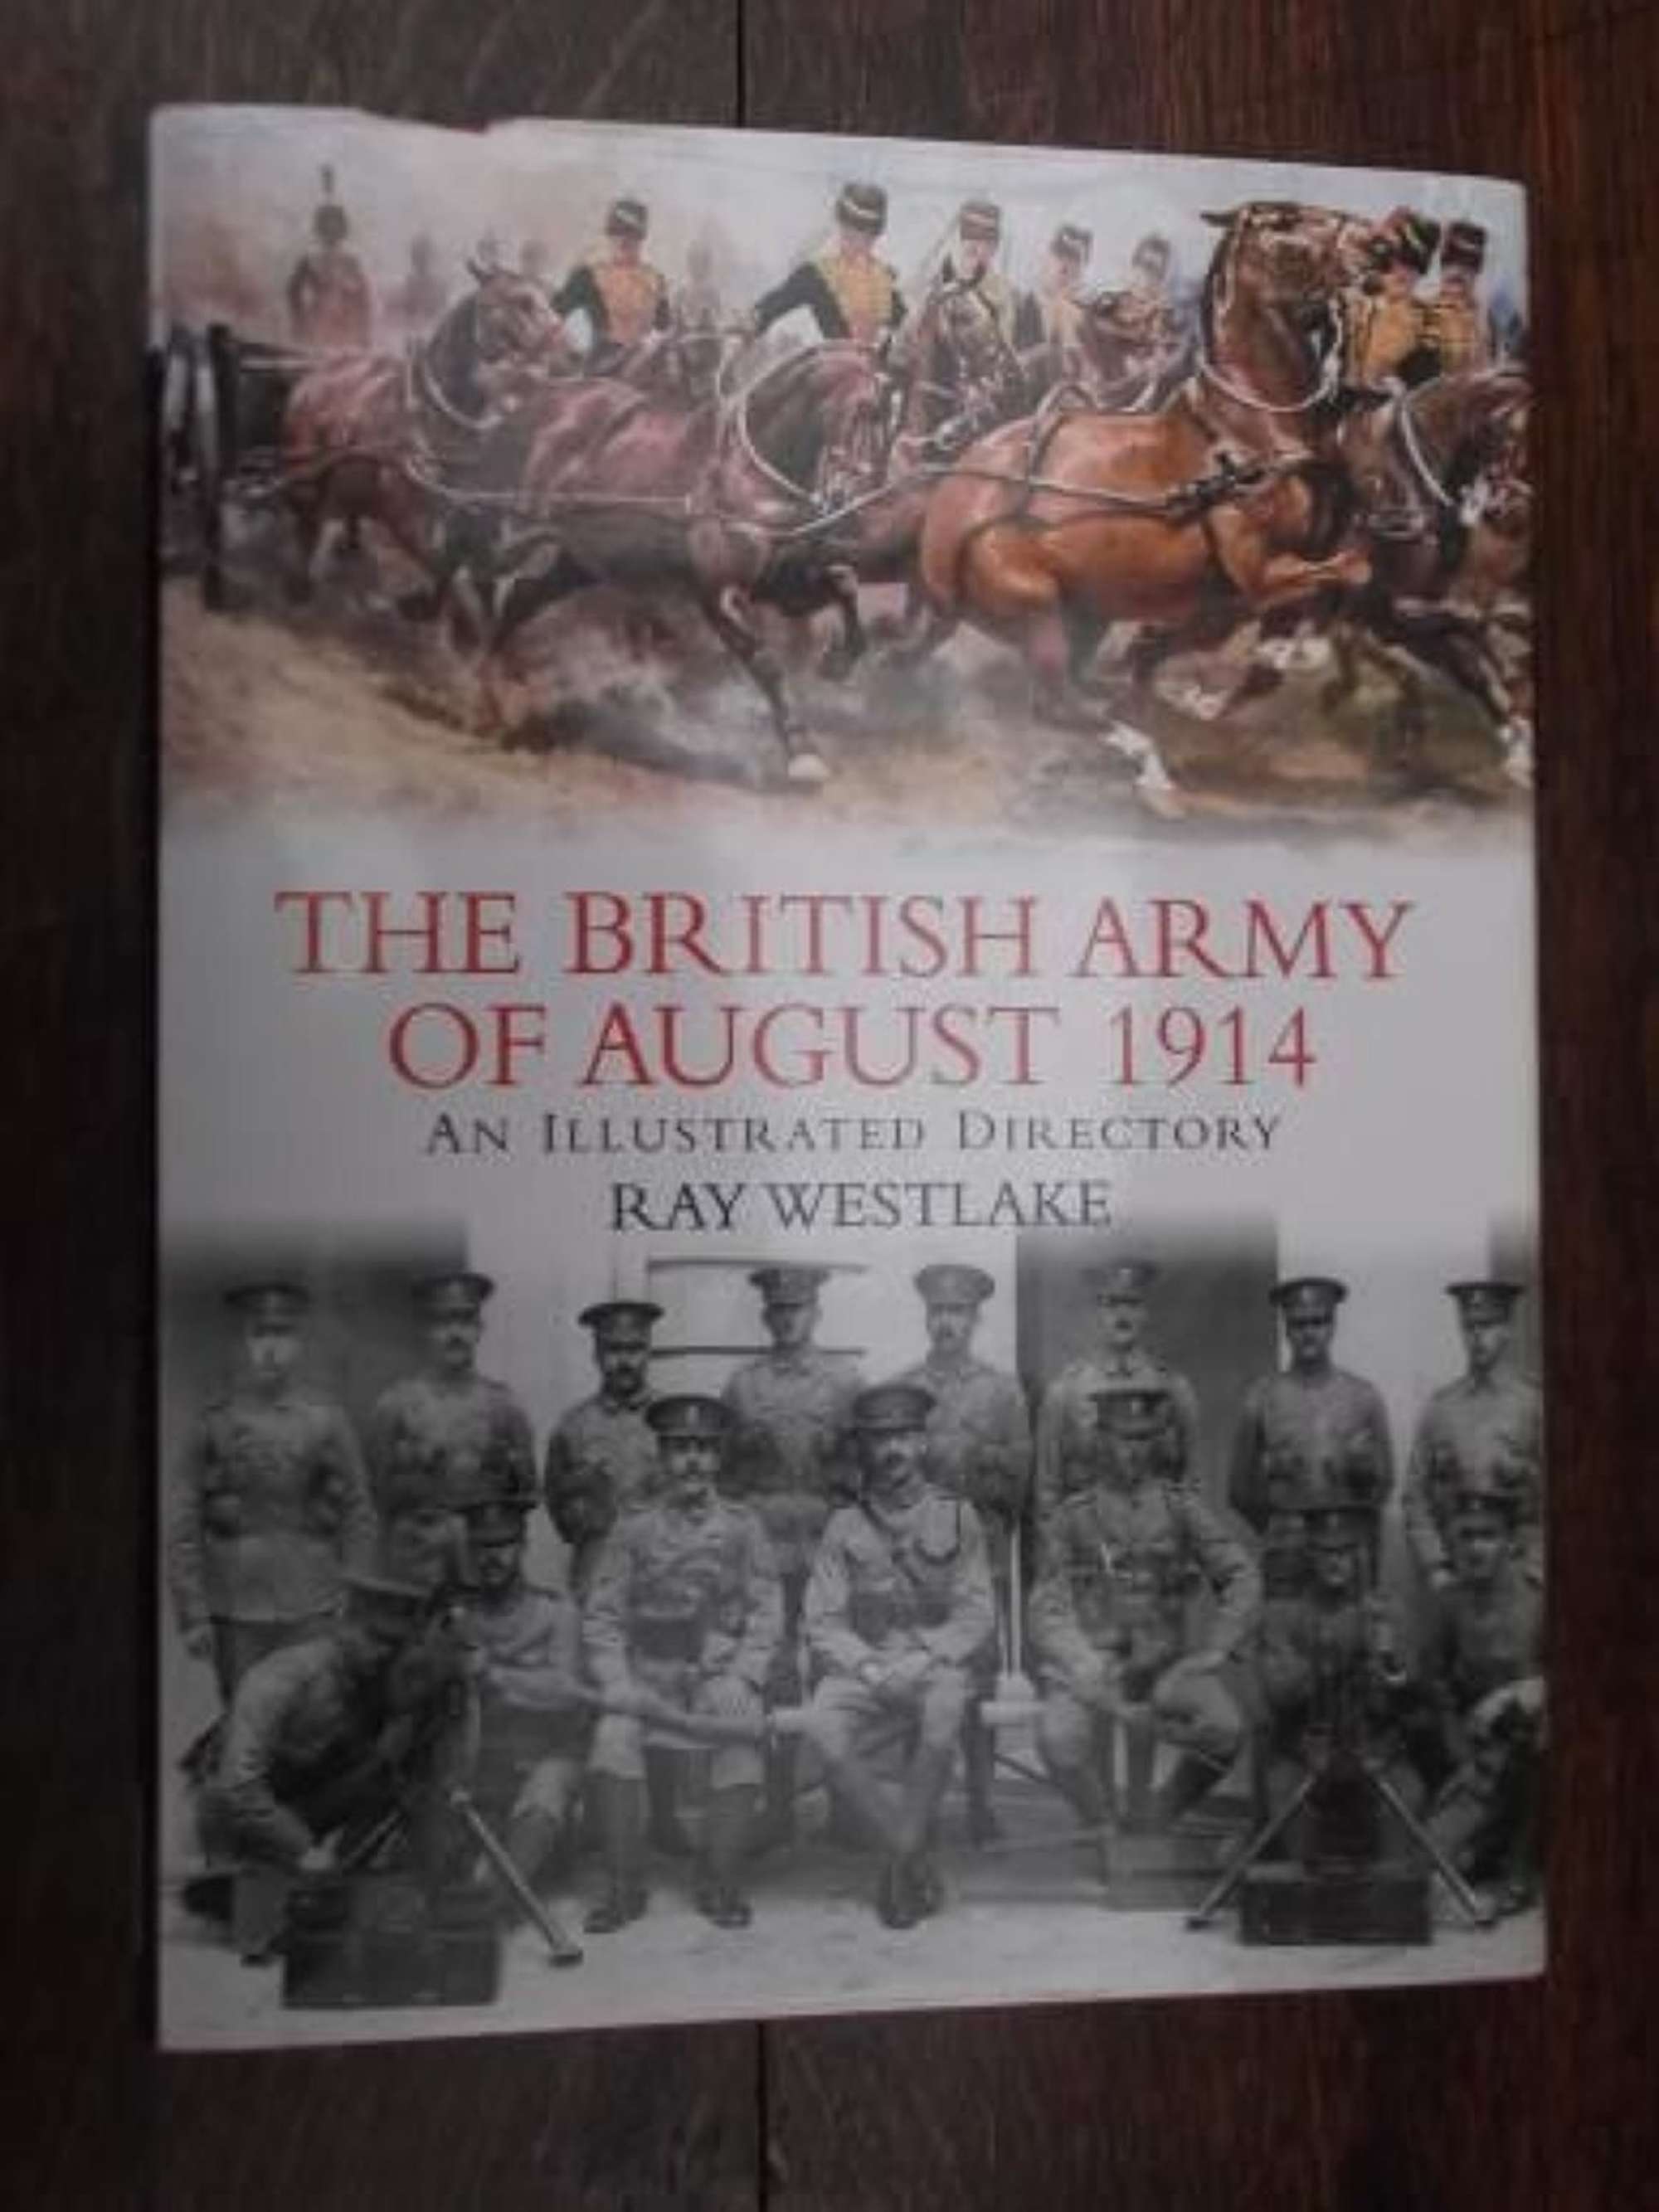 THE BRITISH ARMY OF AUGUST 1914: RAY WESTLAKE